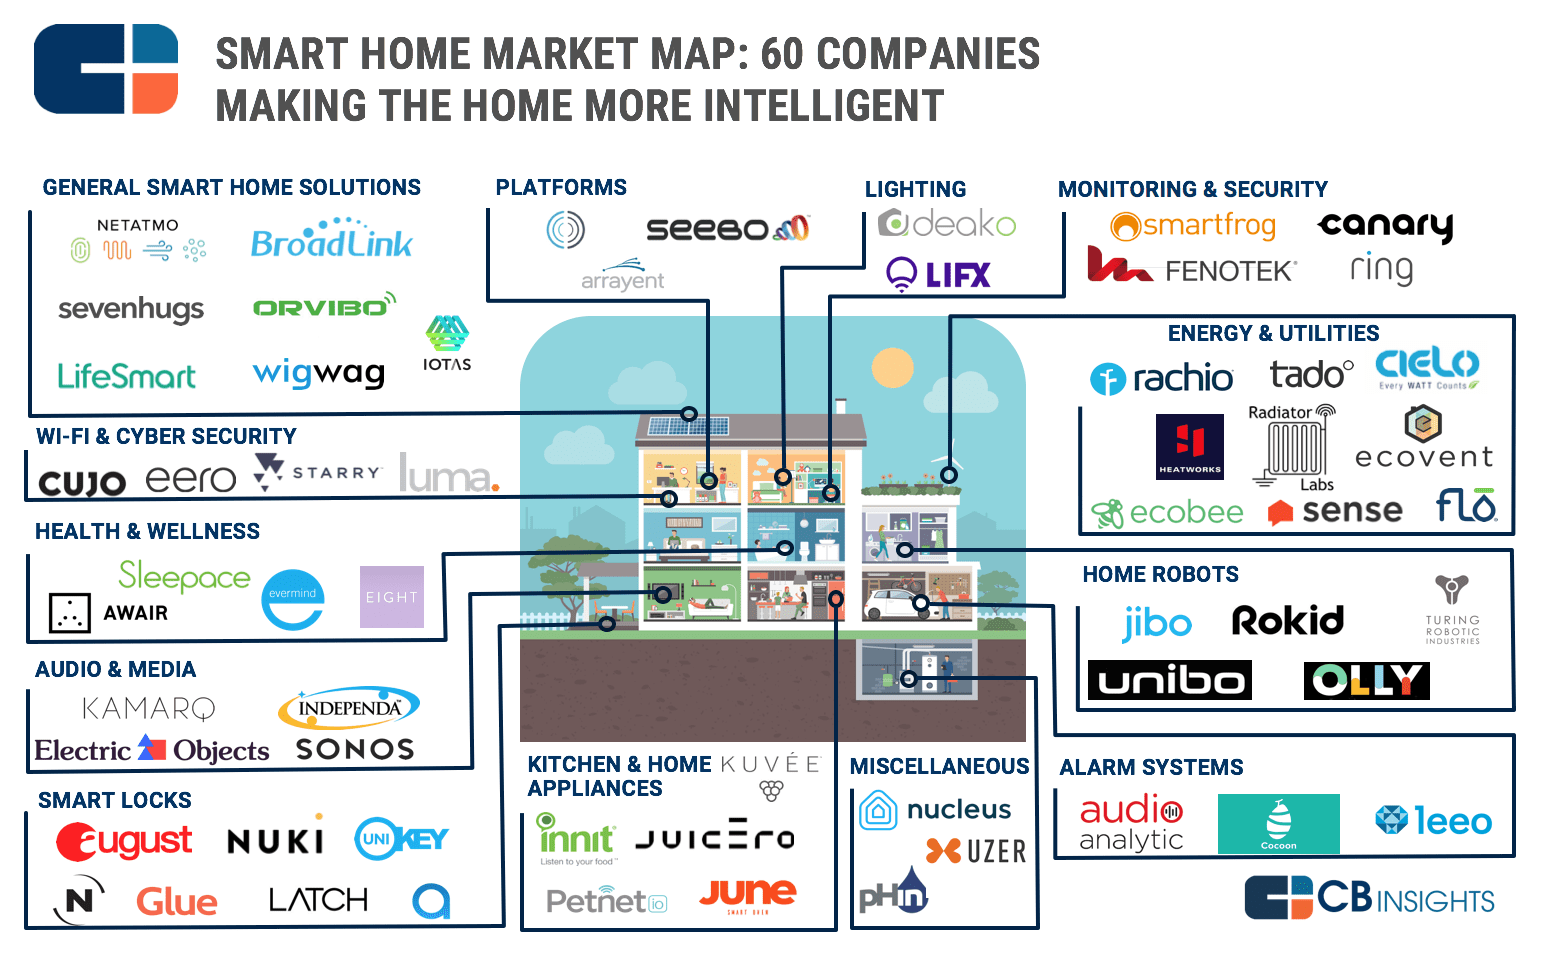 https://research-assets.cbinsights.com/2017/07/31133727/smarthome-60-Map.png